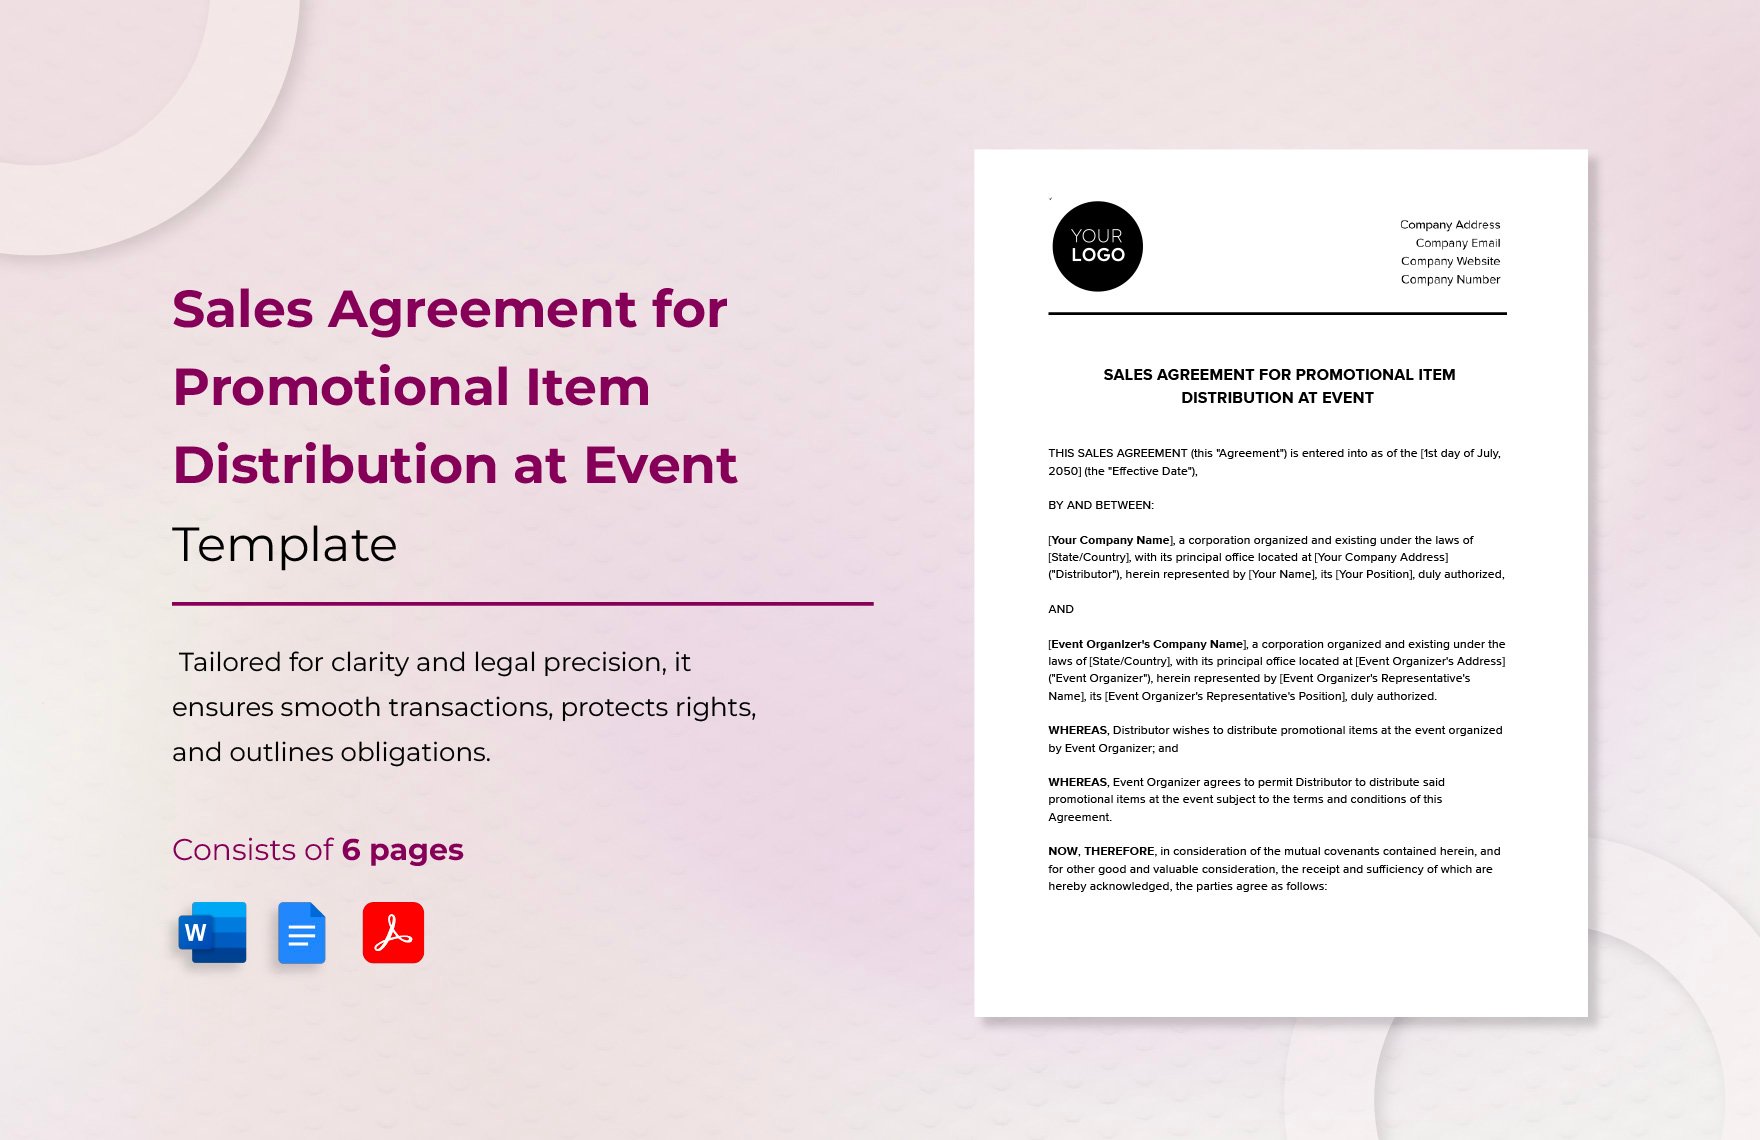 Sales Agreement for Promotional Item Distribution at Event Template